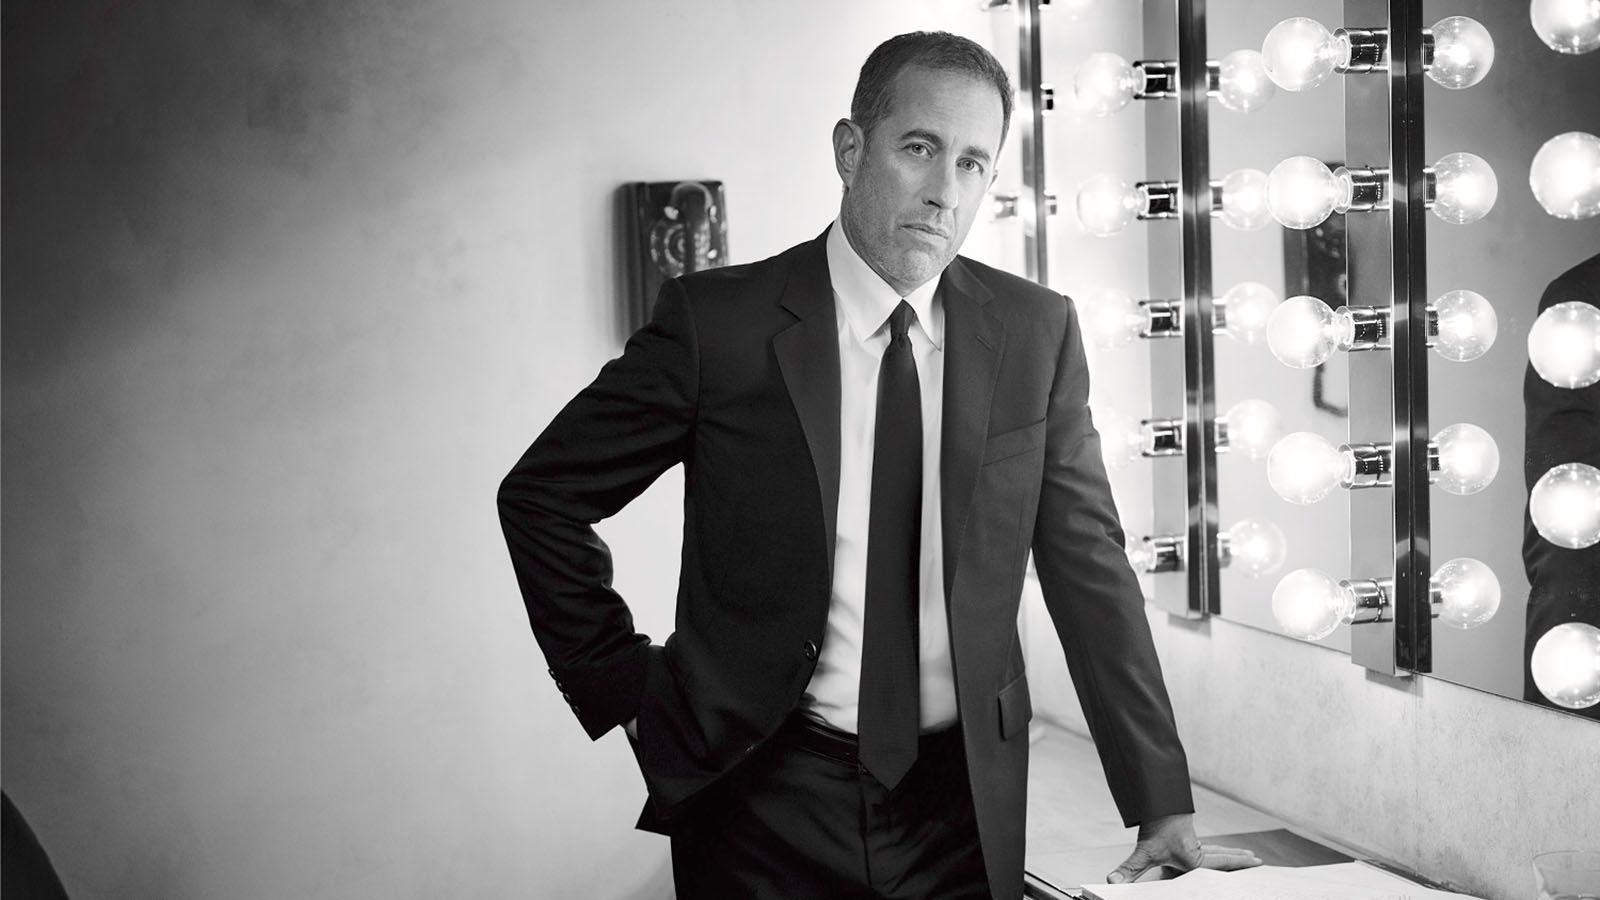 Jerry Seinfeld will perform to a sold-out Embassy Theatre audience on Thursday, June 22.